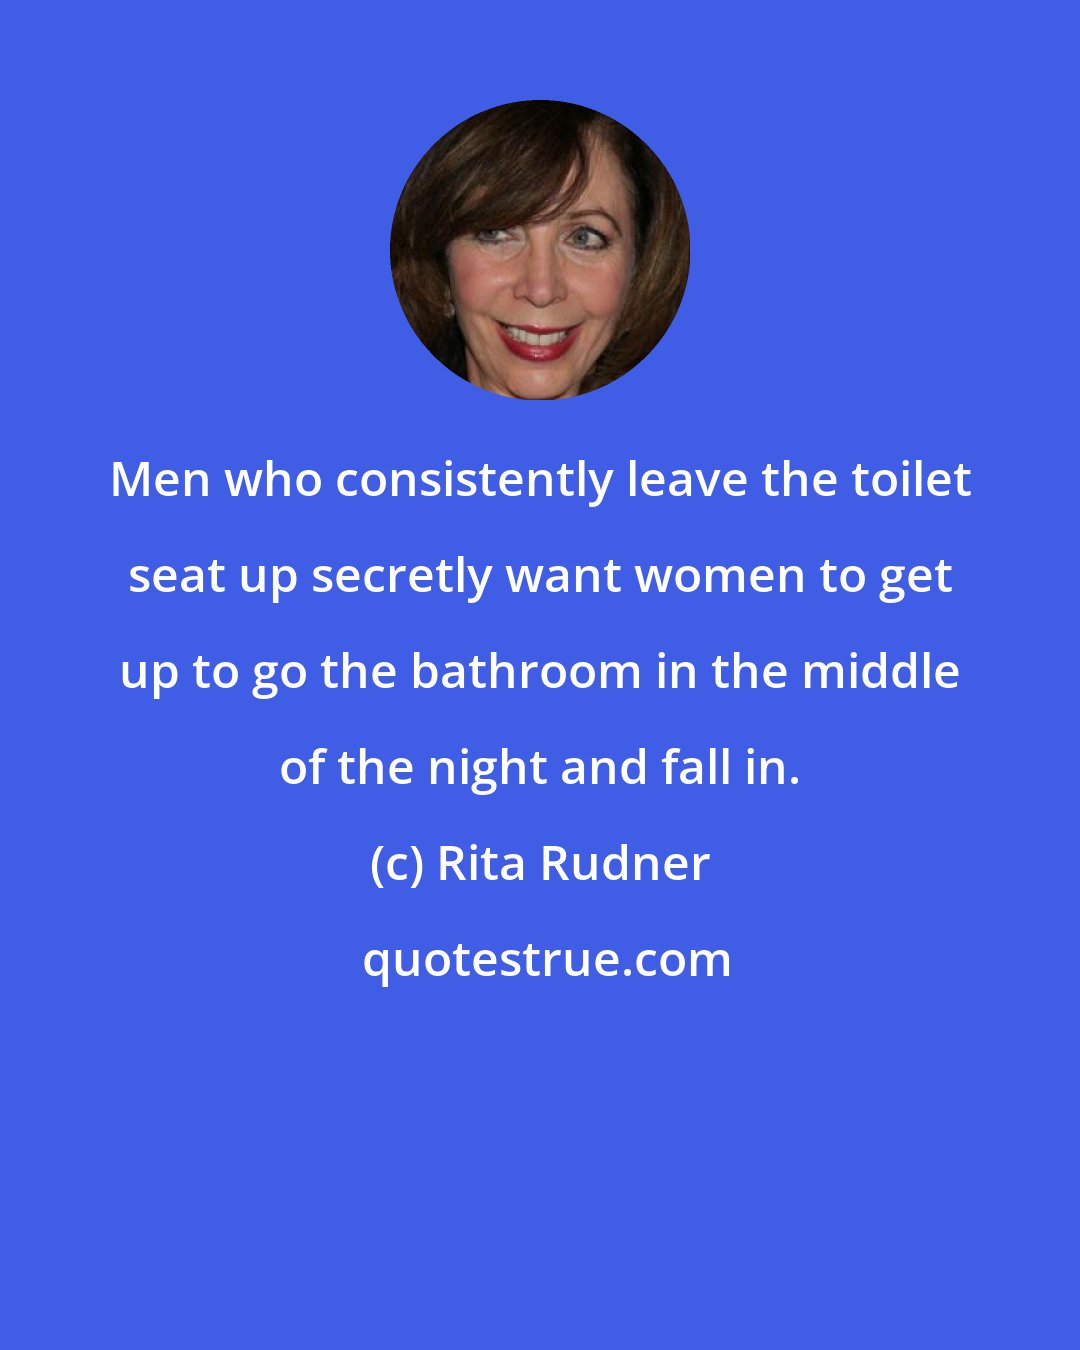 Rita Rudner: Men who consistently leave the toilet seat up secretly want women to get up to go the bathroom in the middle of the night and fall in.